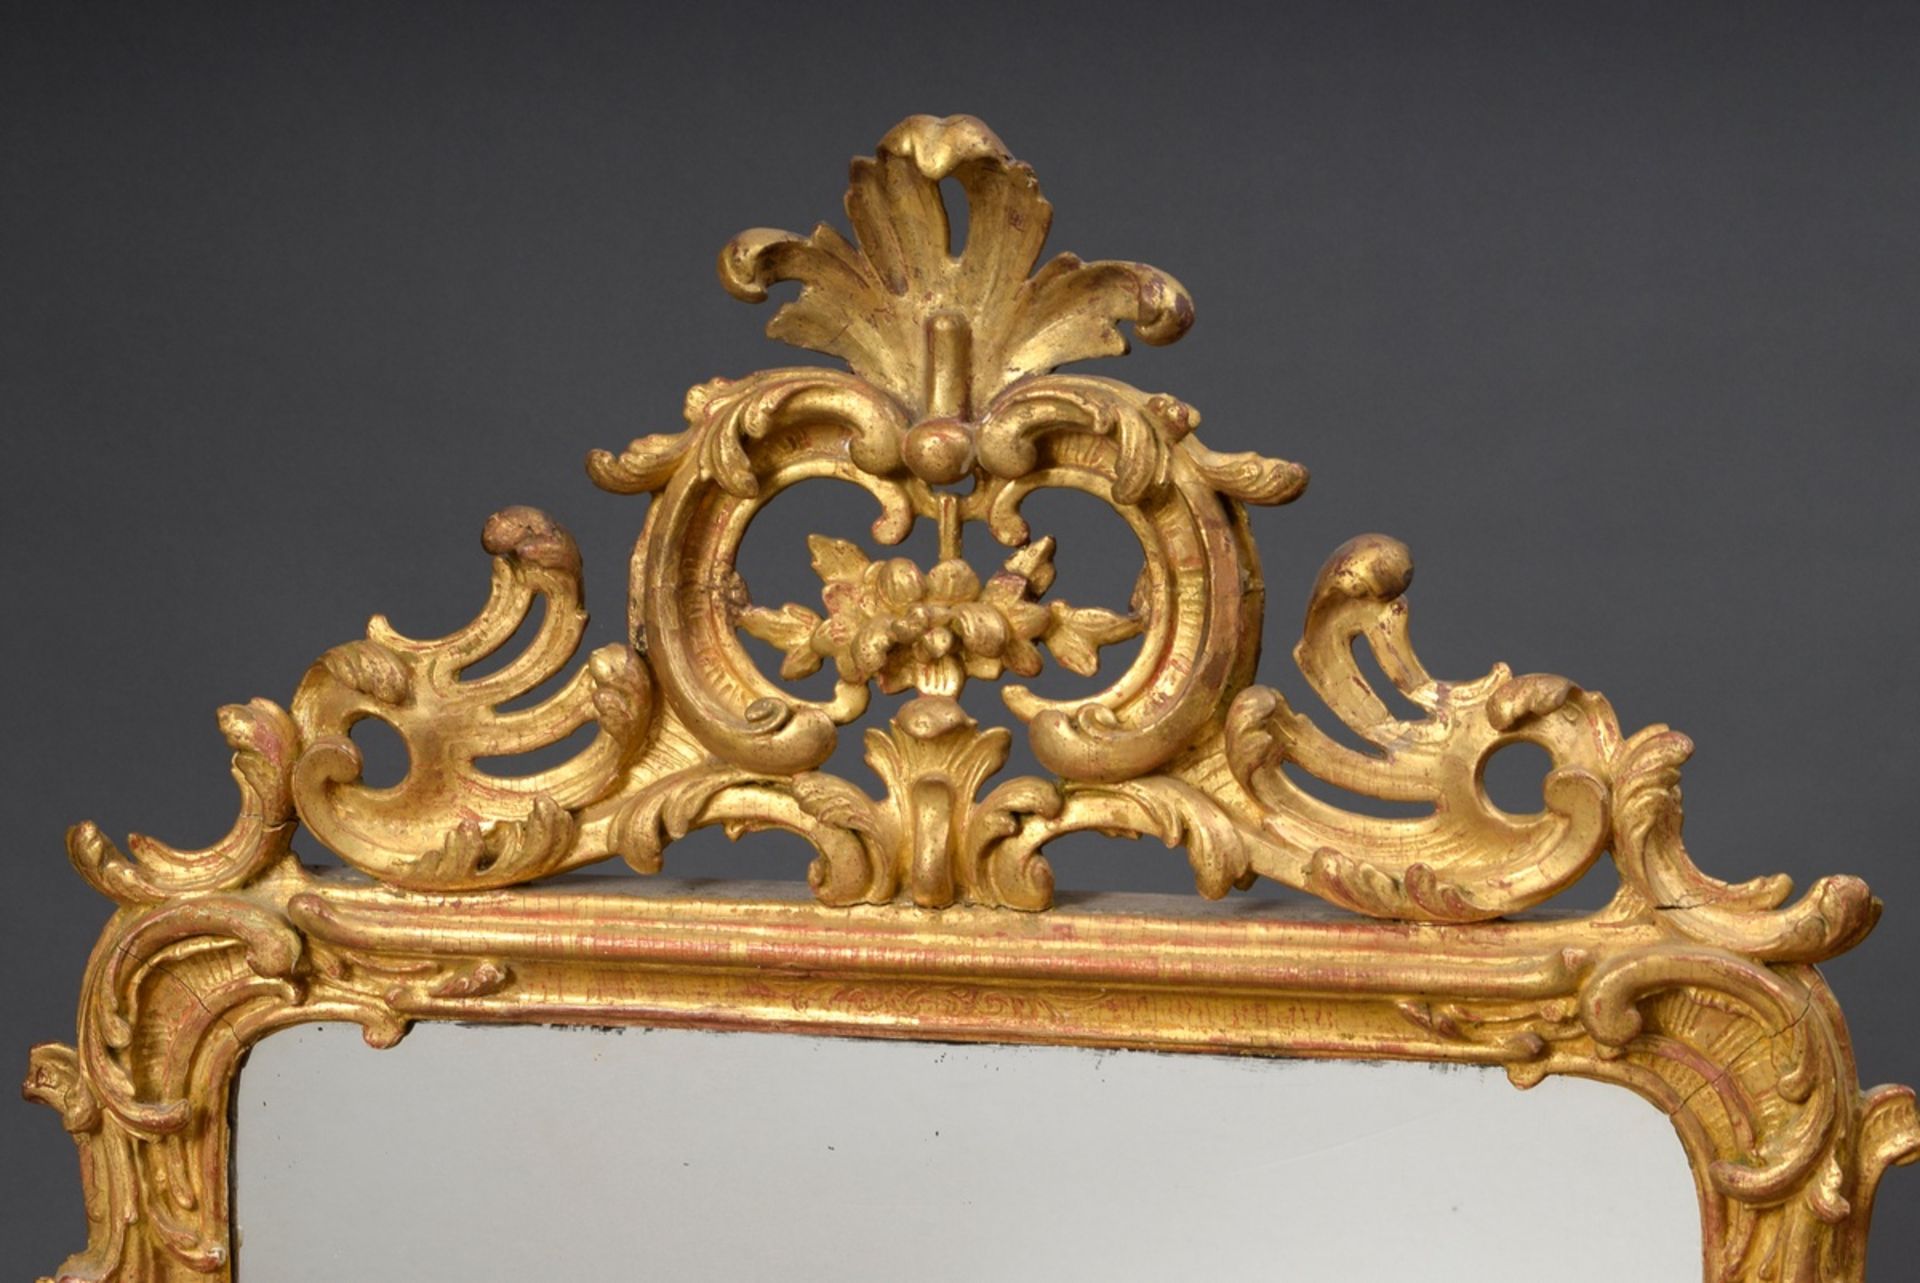 Large rococo console mirror with carved and gilded frame, openwork rocaille and floral carving in t - Image 2 of 5